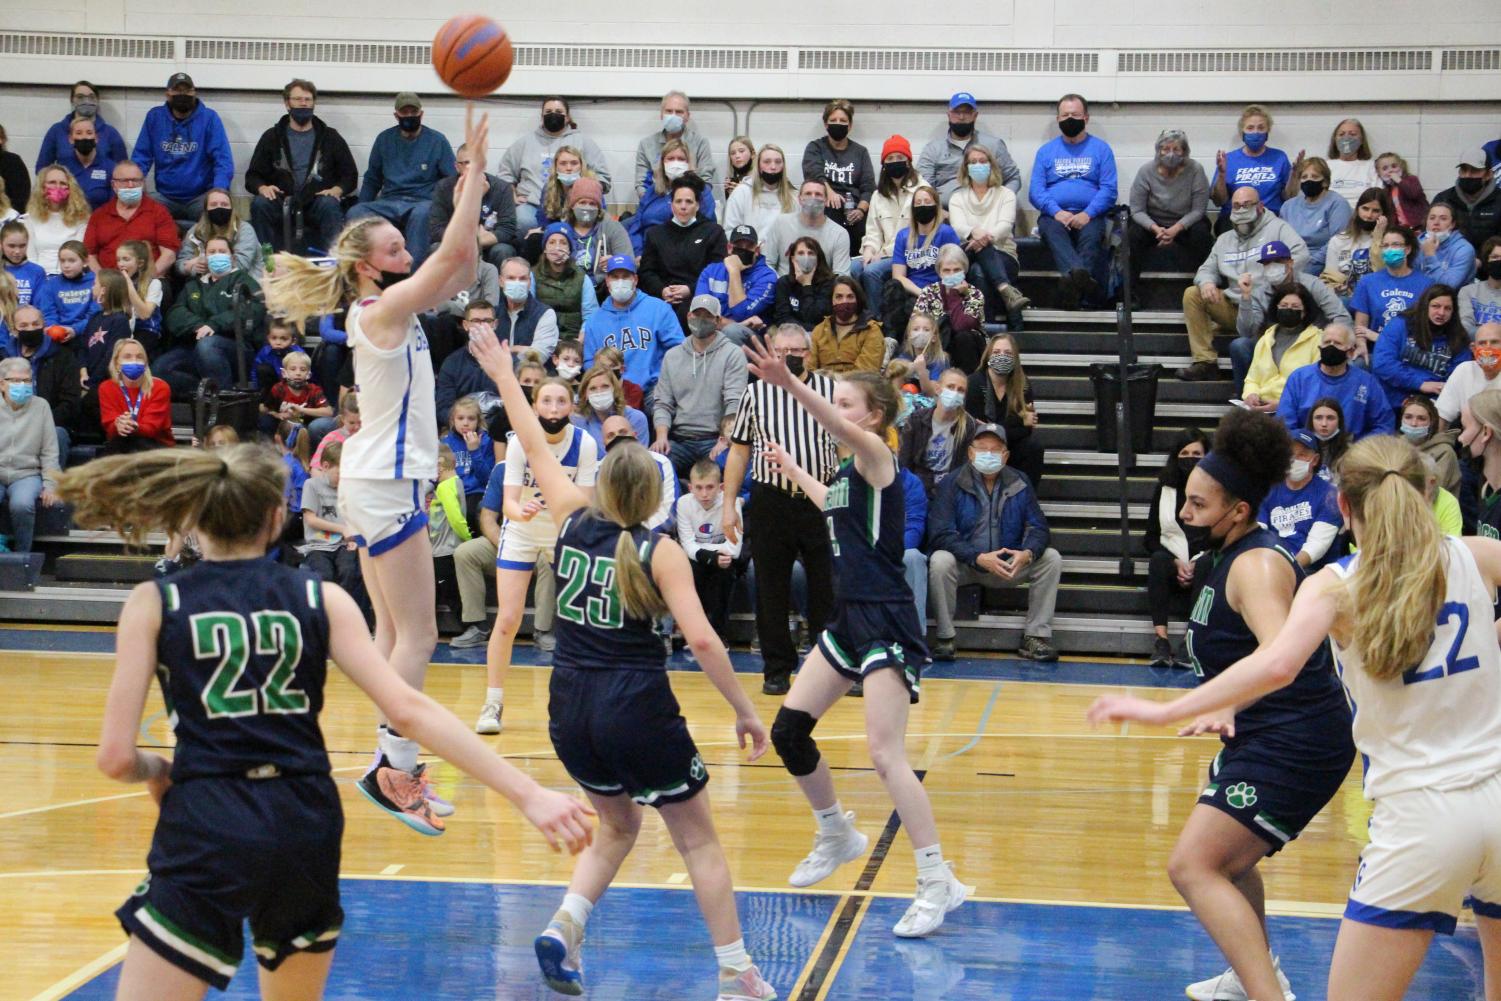 A much anticipated game turns into a must win. “We all have been waiting for this game all season and my teammates and I went into the game knowing we had to come out with a win,” said Gracie Furlong ‘25.